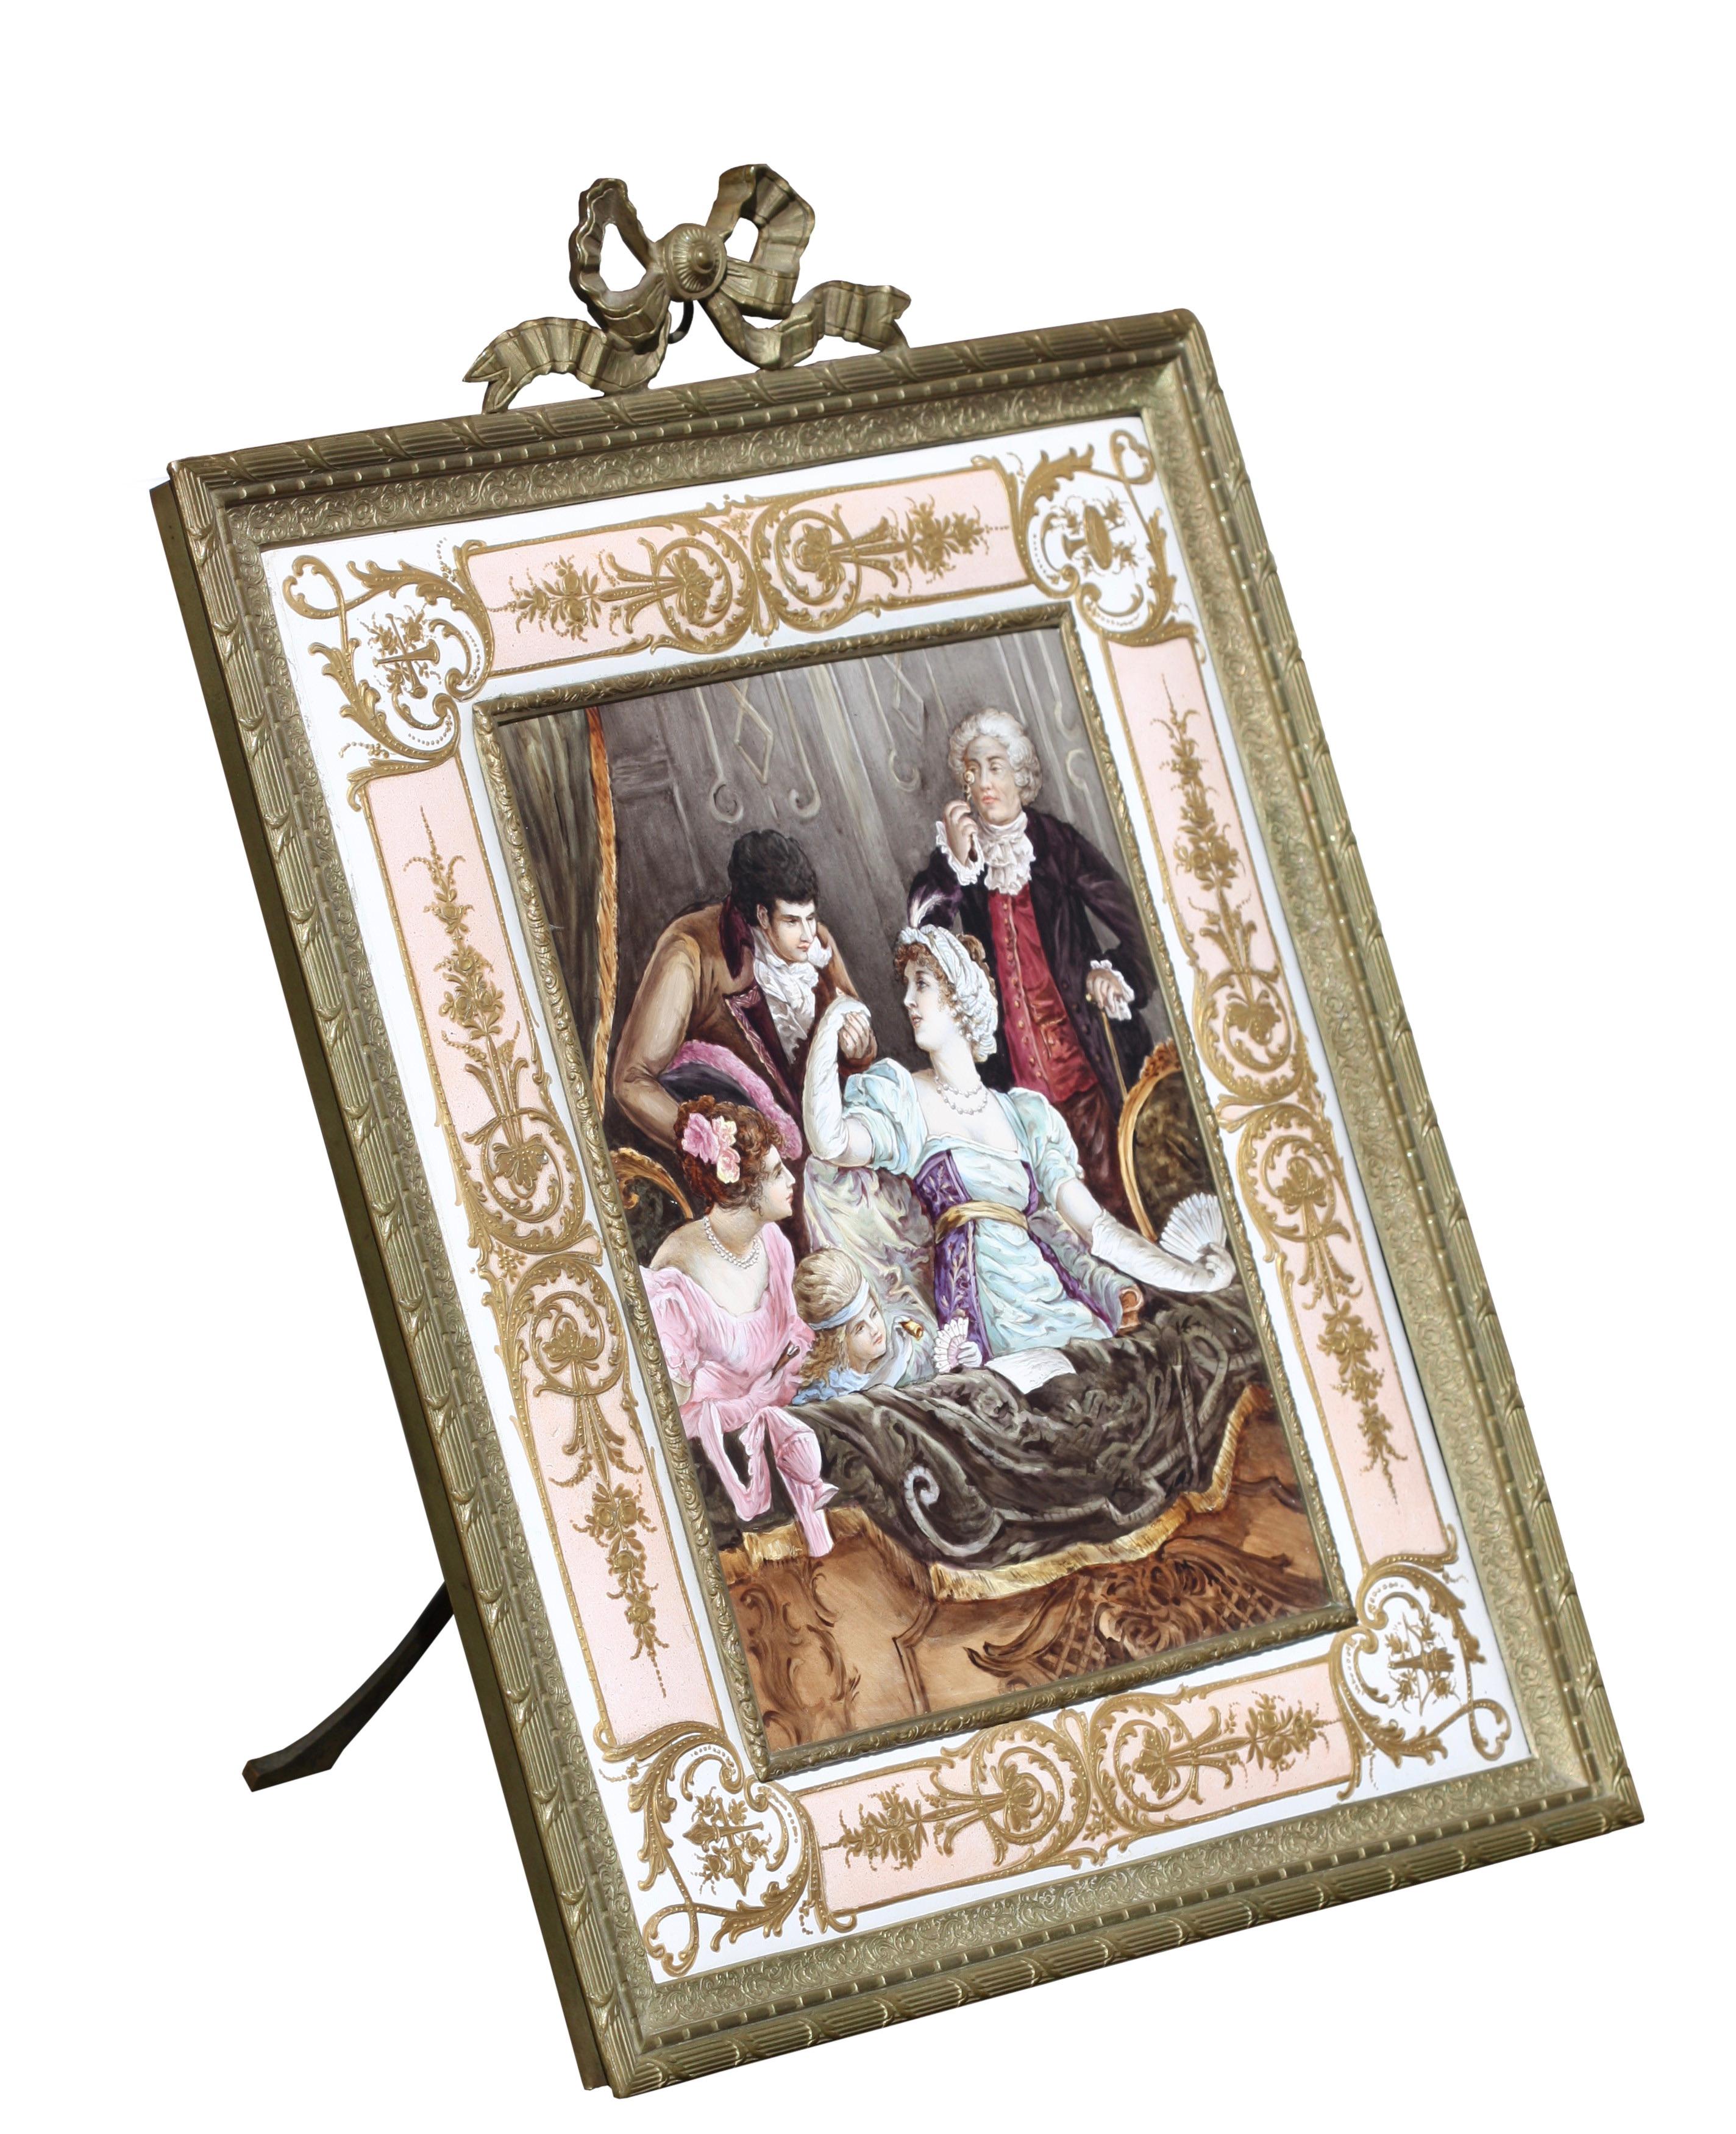 Very Fine French Parcel-Gilt Enamel Plaque within Ormolu Frame In Good Condition For Sale In West Palm Beach, FL